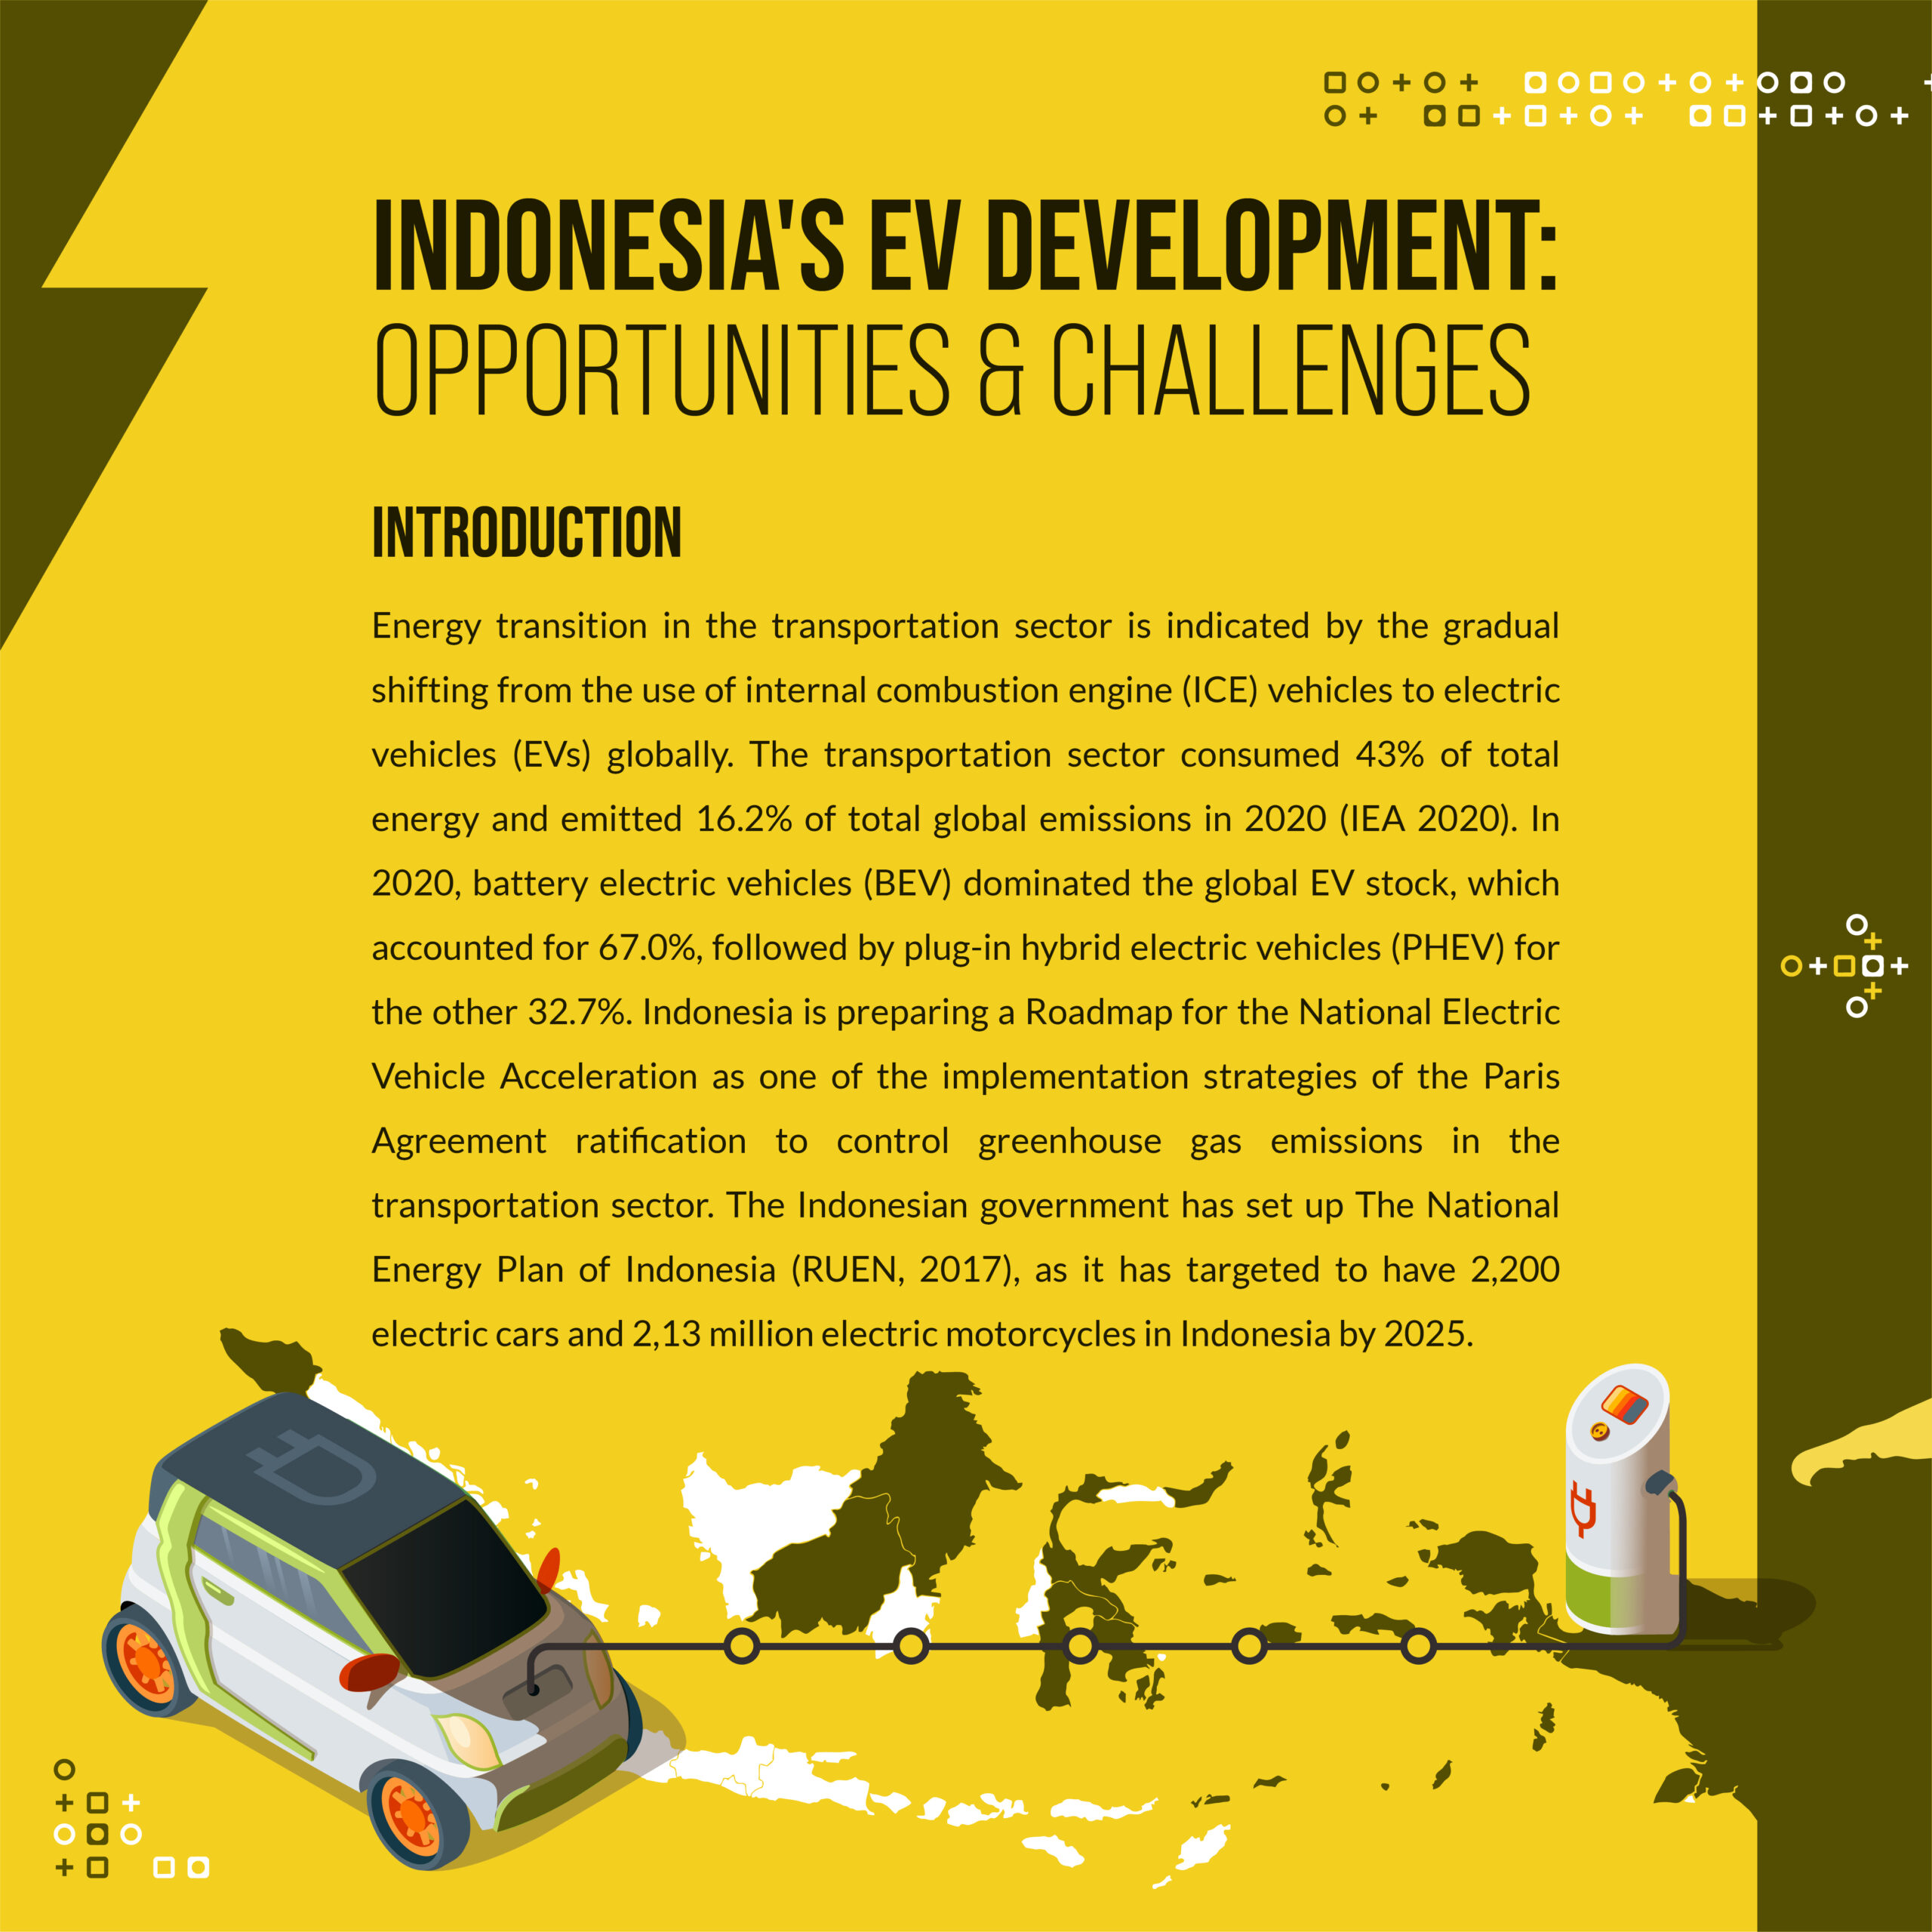 2021.11-Indonesias EV Development Opportunities & Challenges_ig page 1